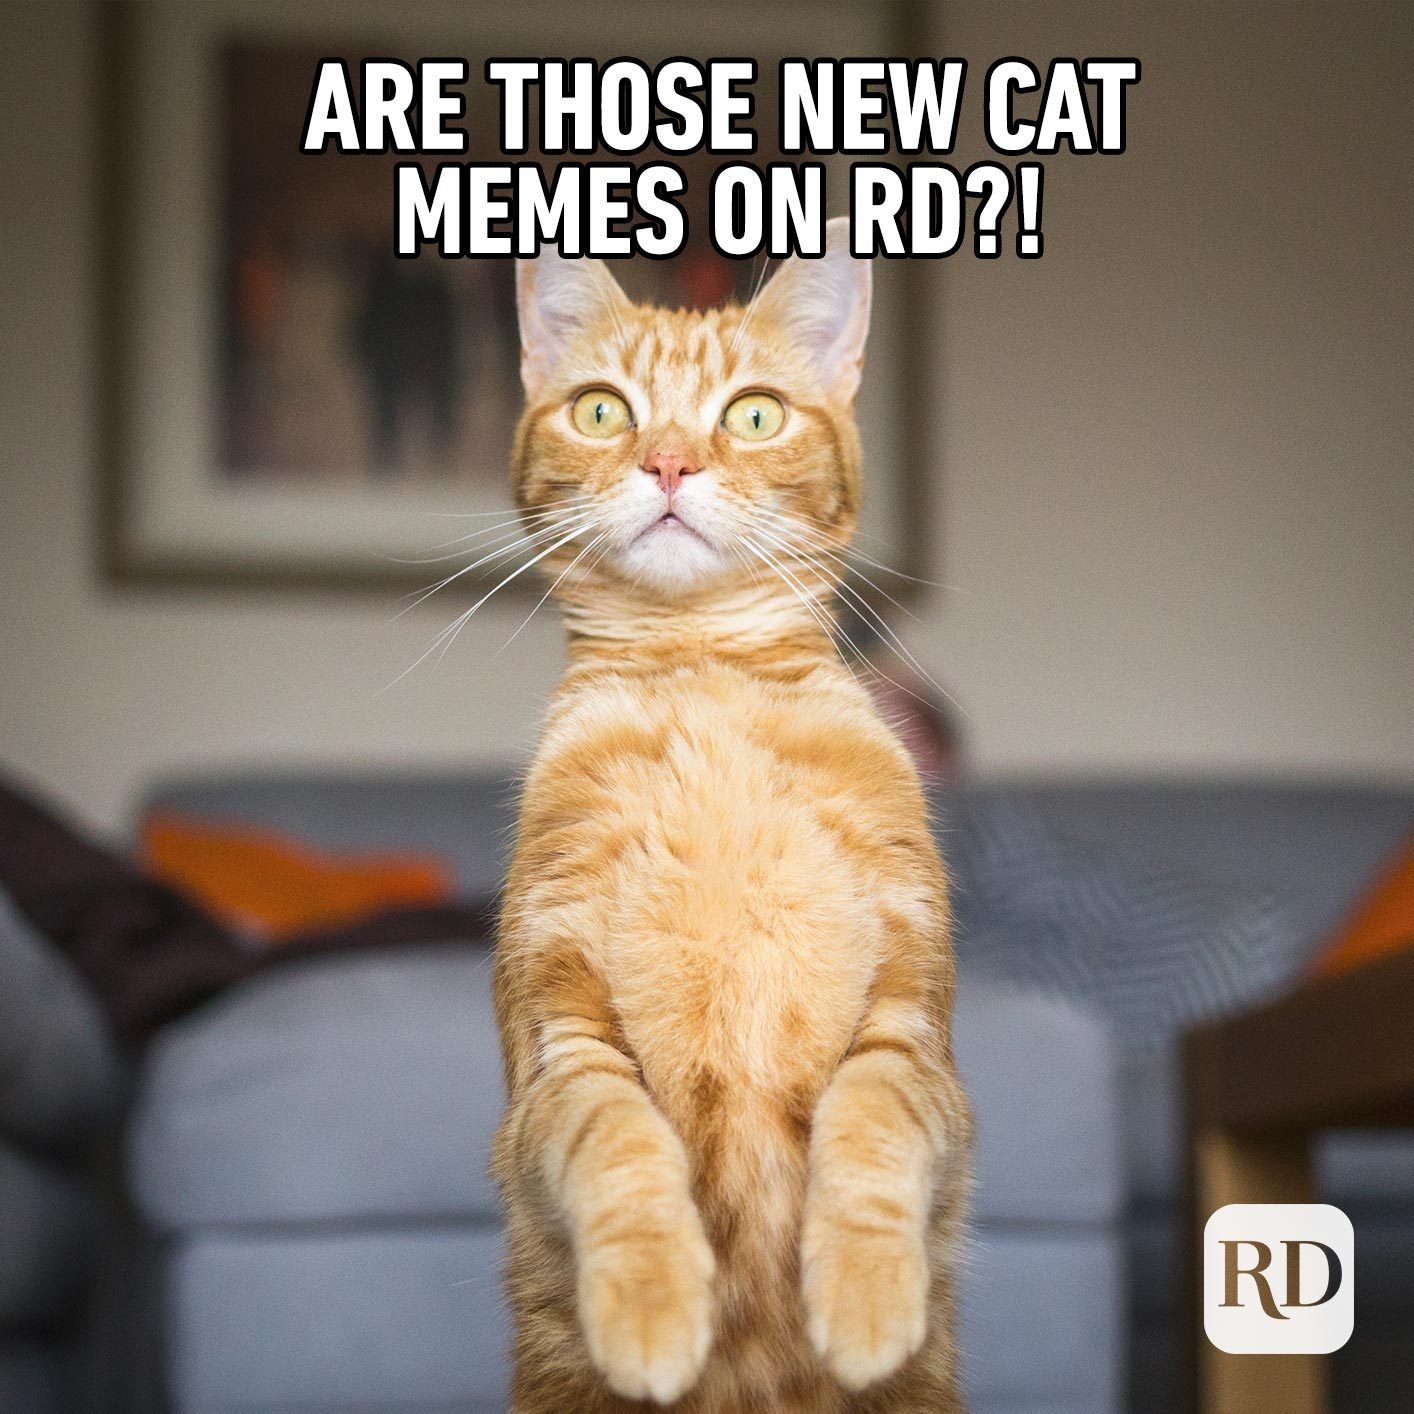 60 Cat Memes You'll Laugh at Every Time Reader's Digest